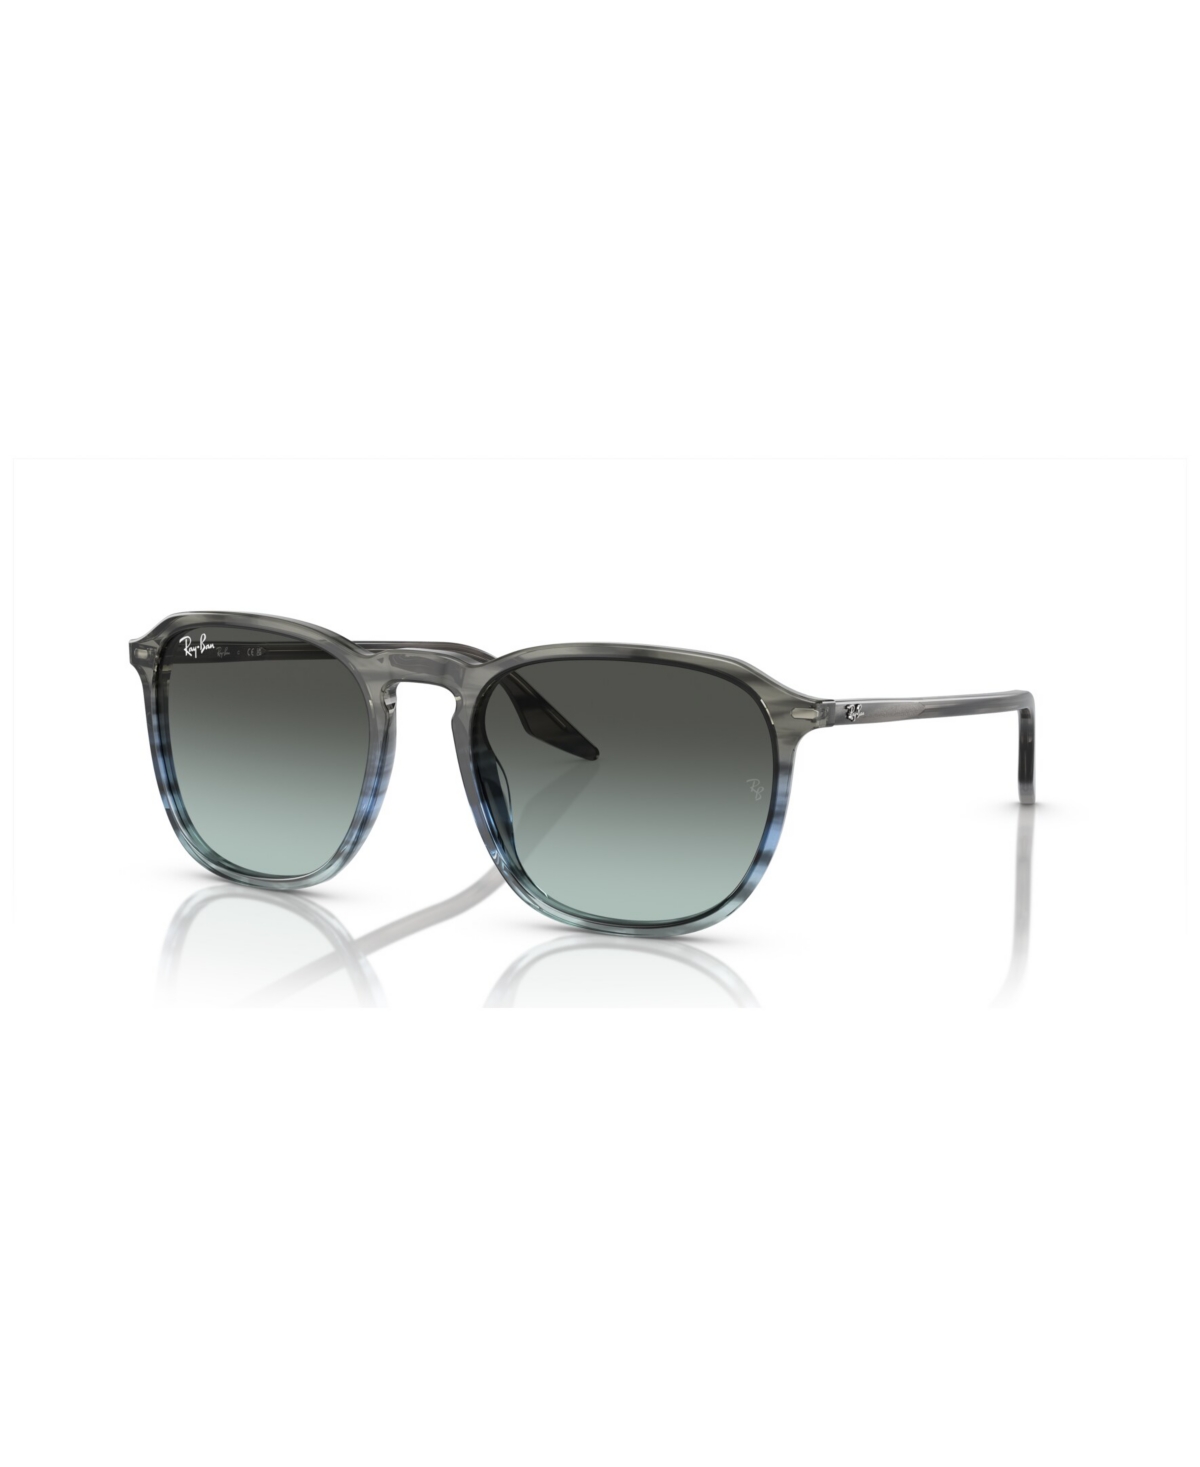 Ray Ban Unisex Sunglasses, Gradient Rb2203 In Striped Blue,green